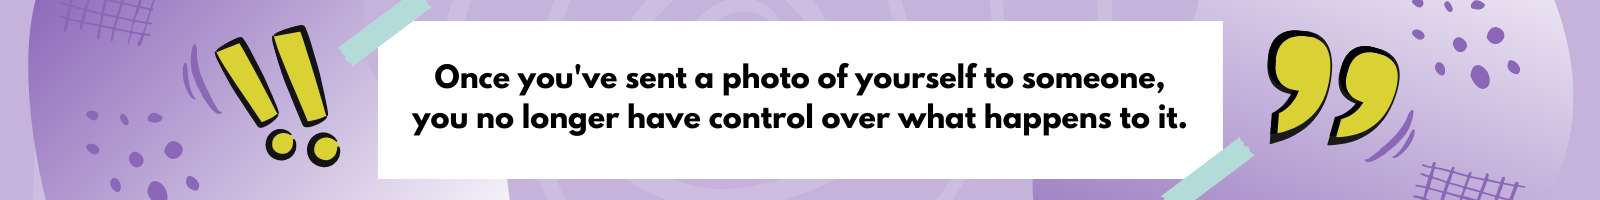 Once you’ve sent a photo of yourself to someone, you no longer have control over what happens to it.